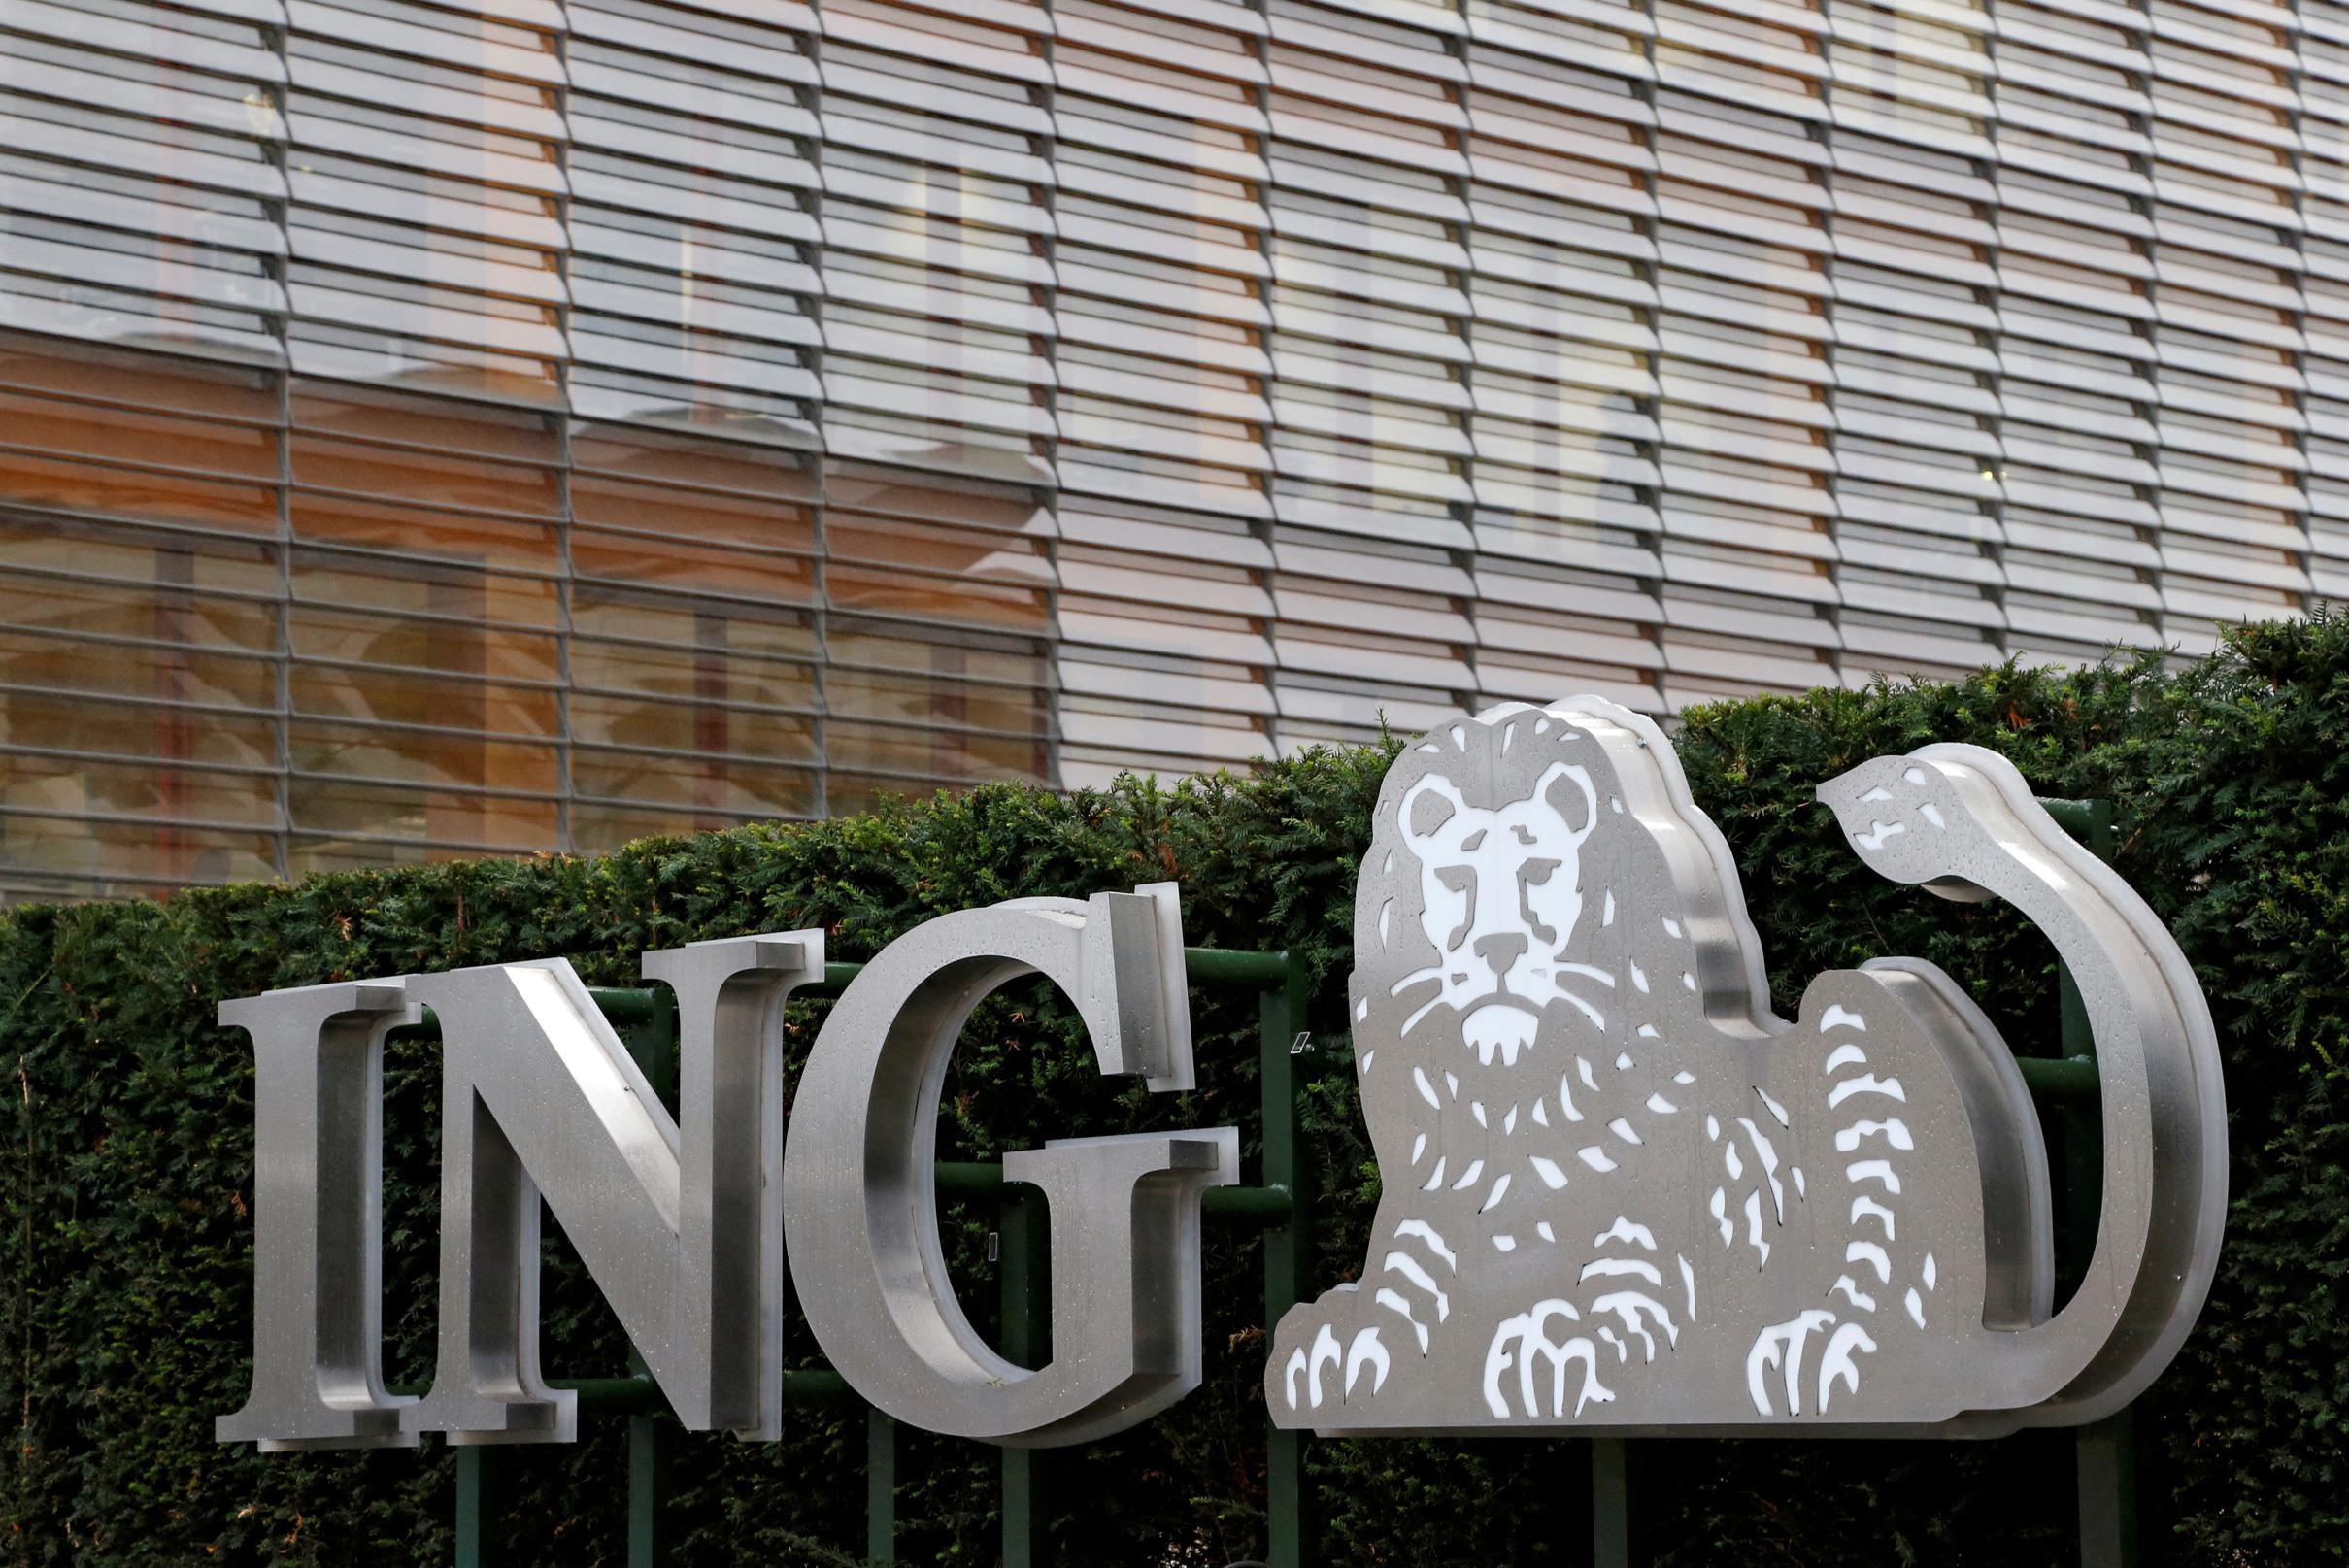 ING faces demand of $500 million from investors over money laundering scandal